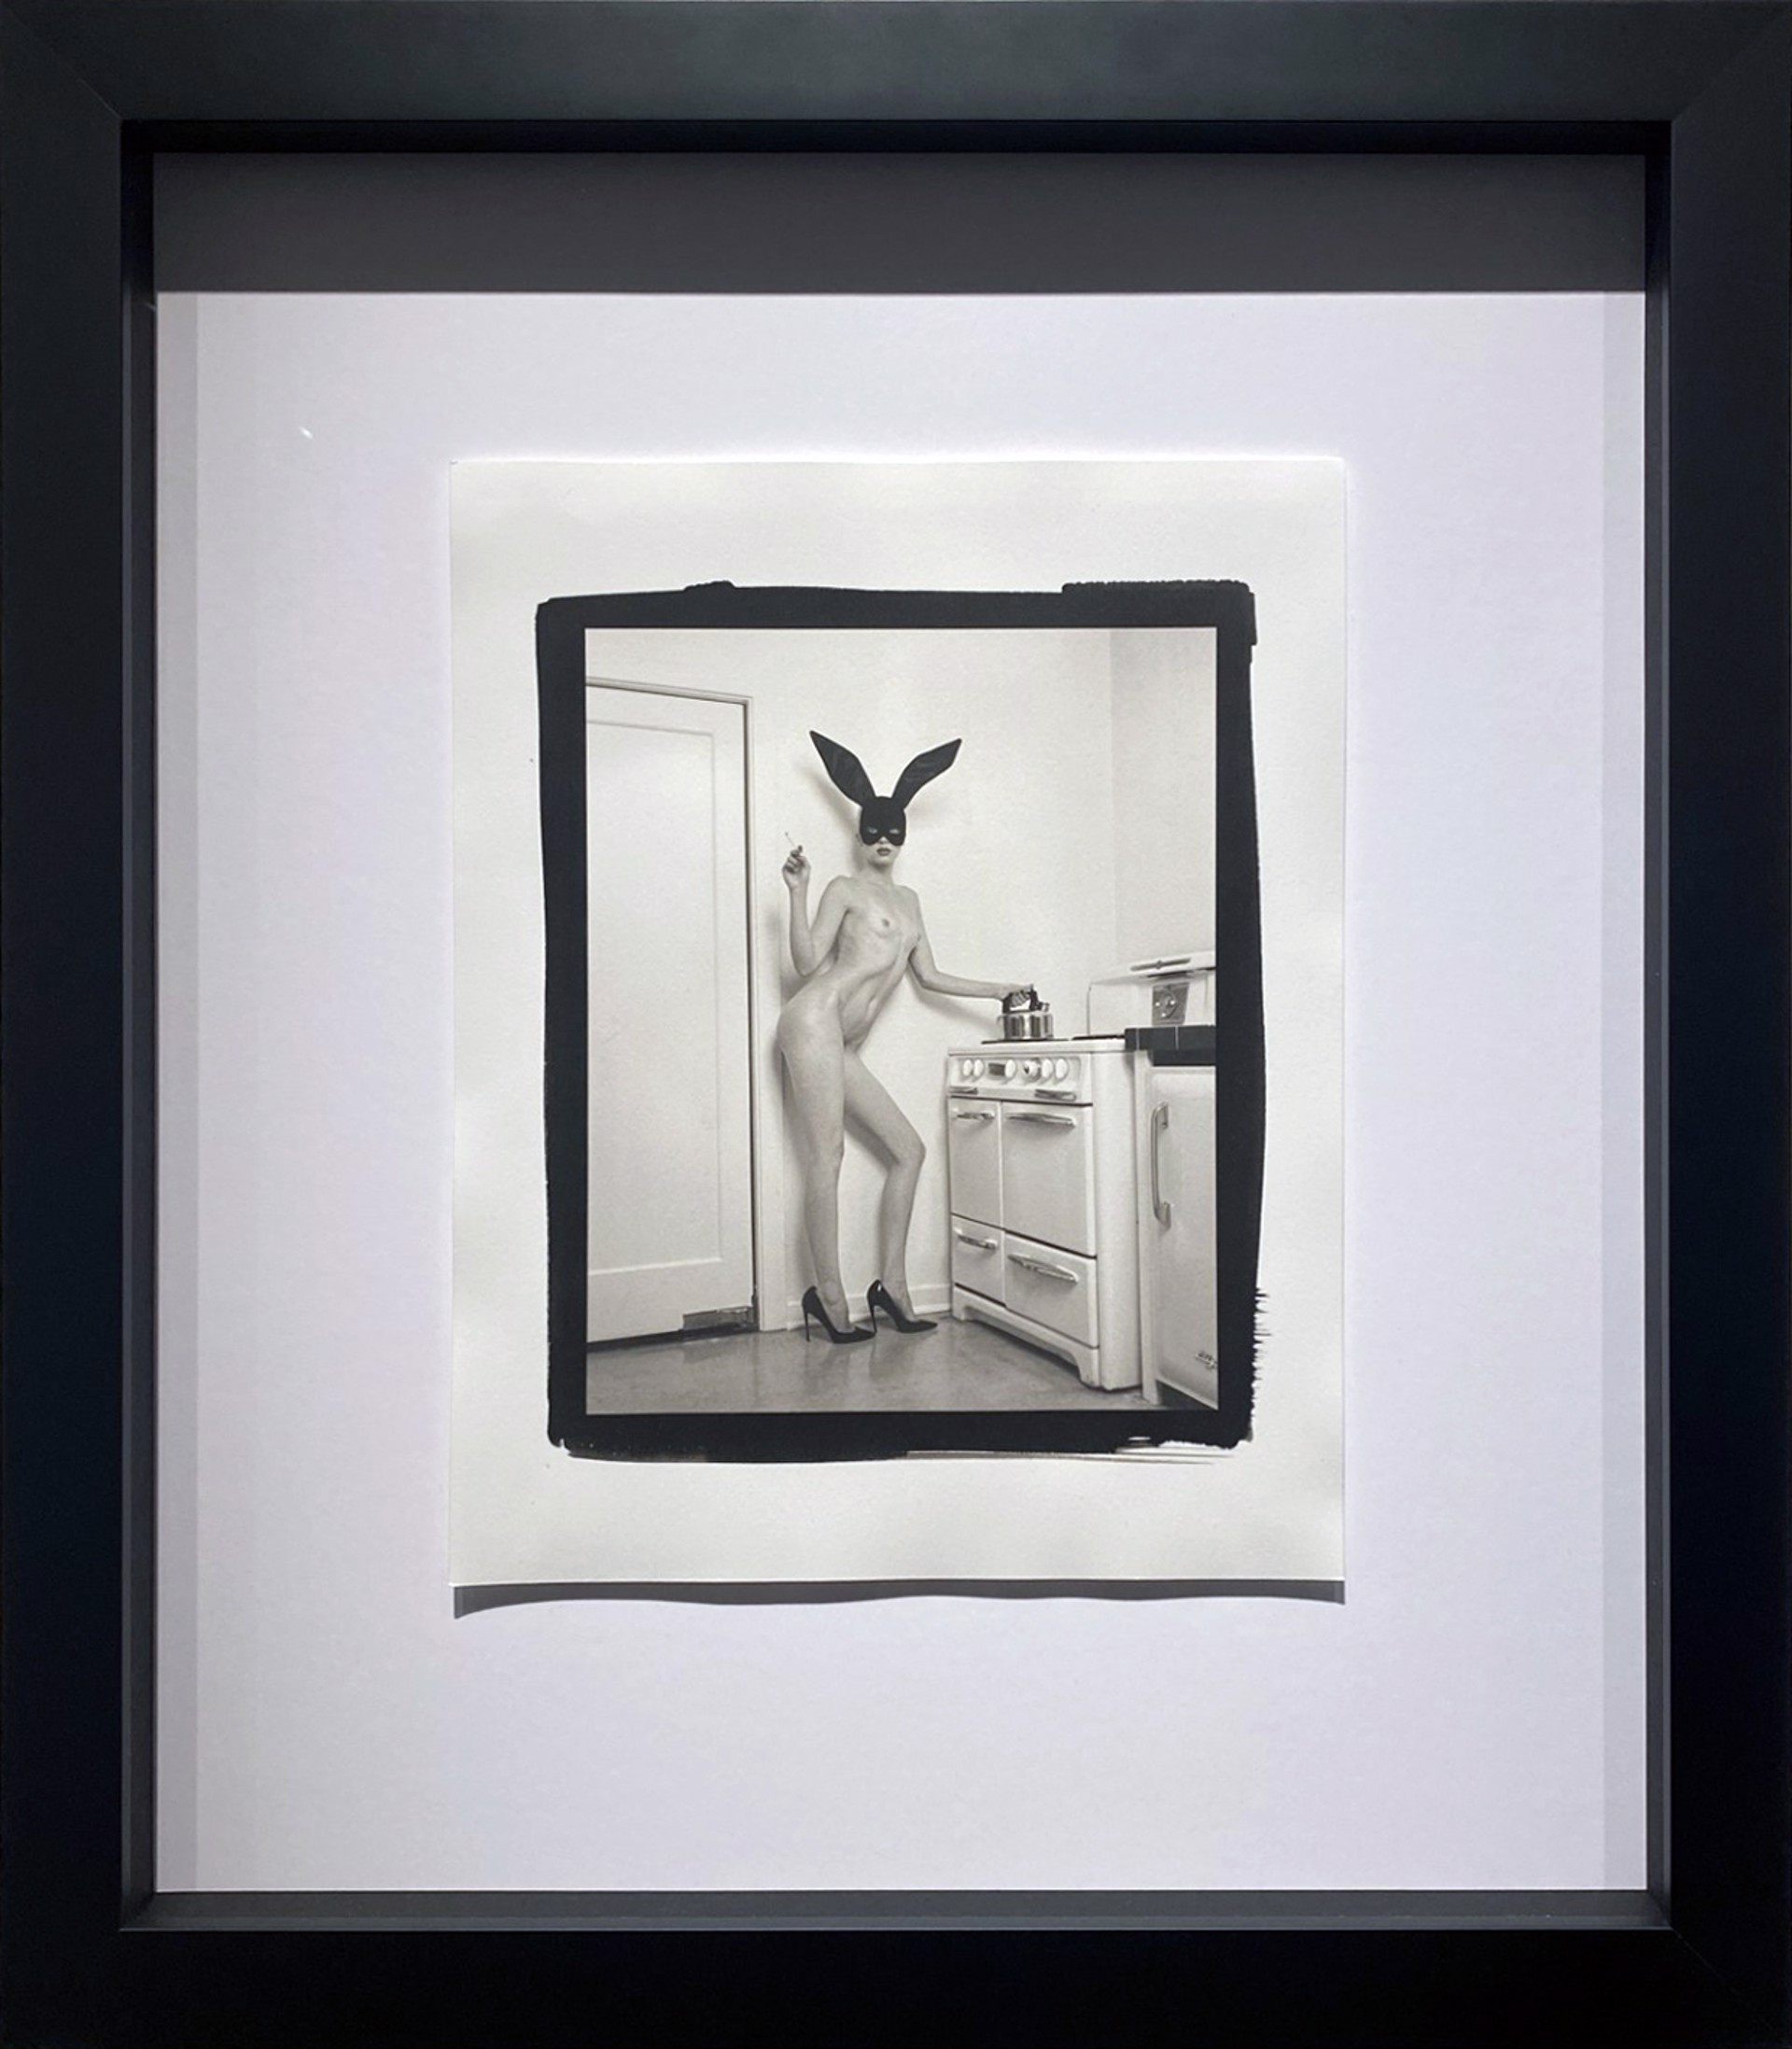 Bunny in the Kitchen by Tyler Shields